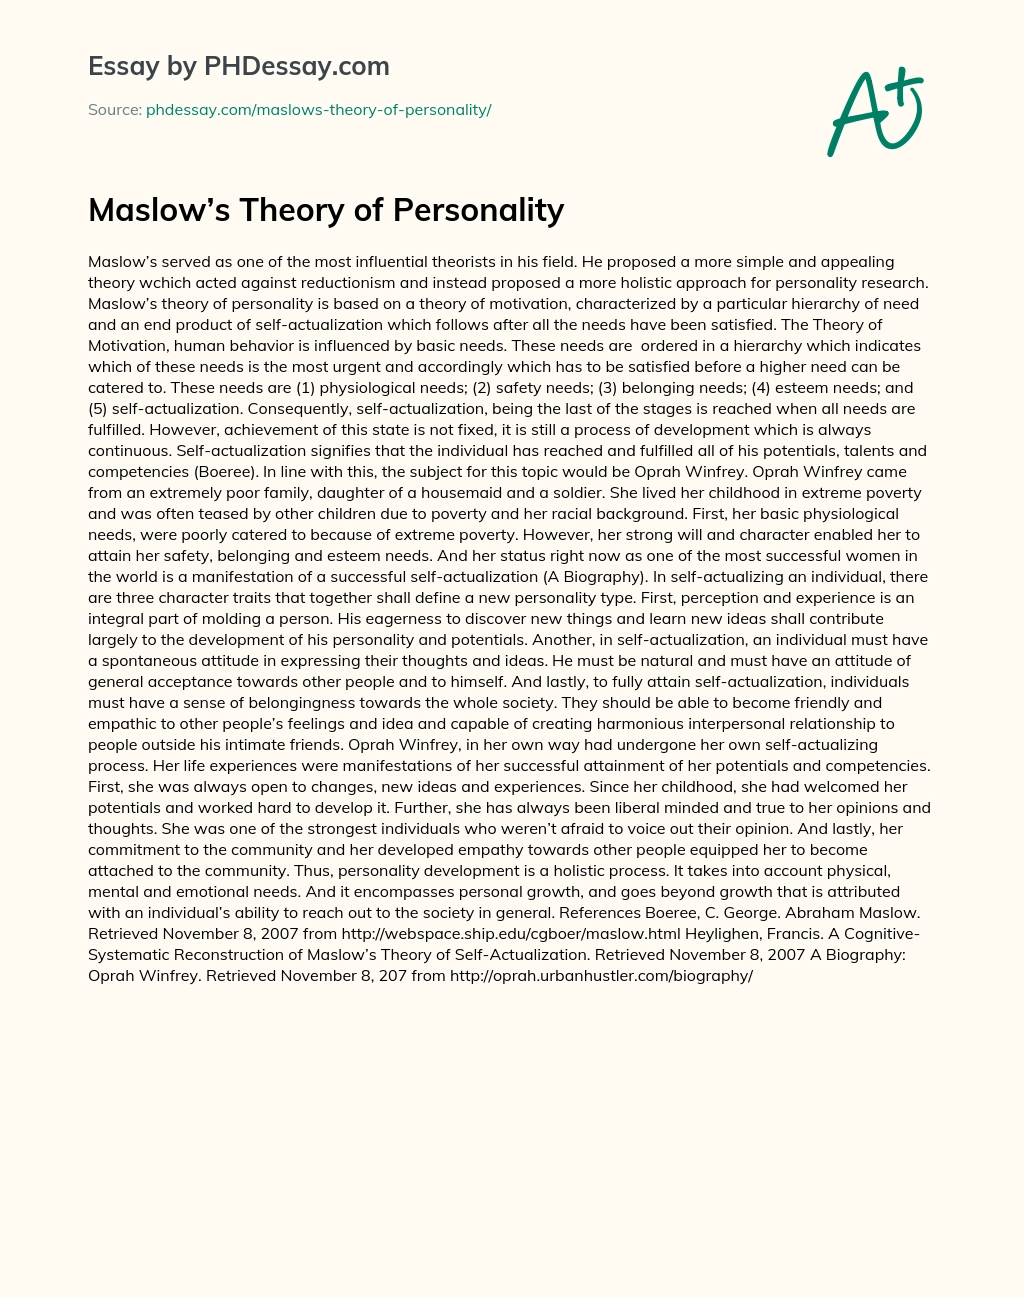 Maslow’s Theory of Personality essay